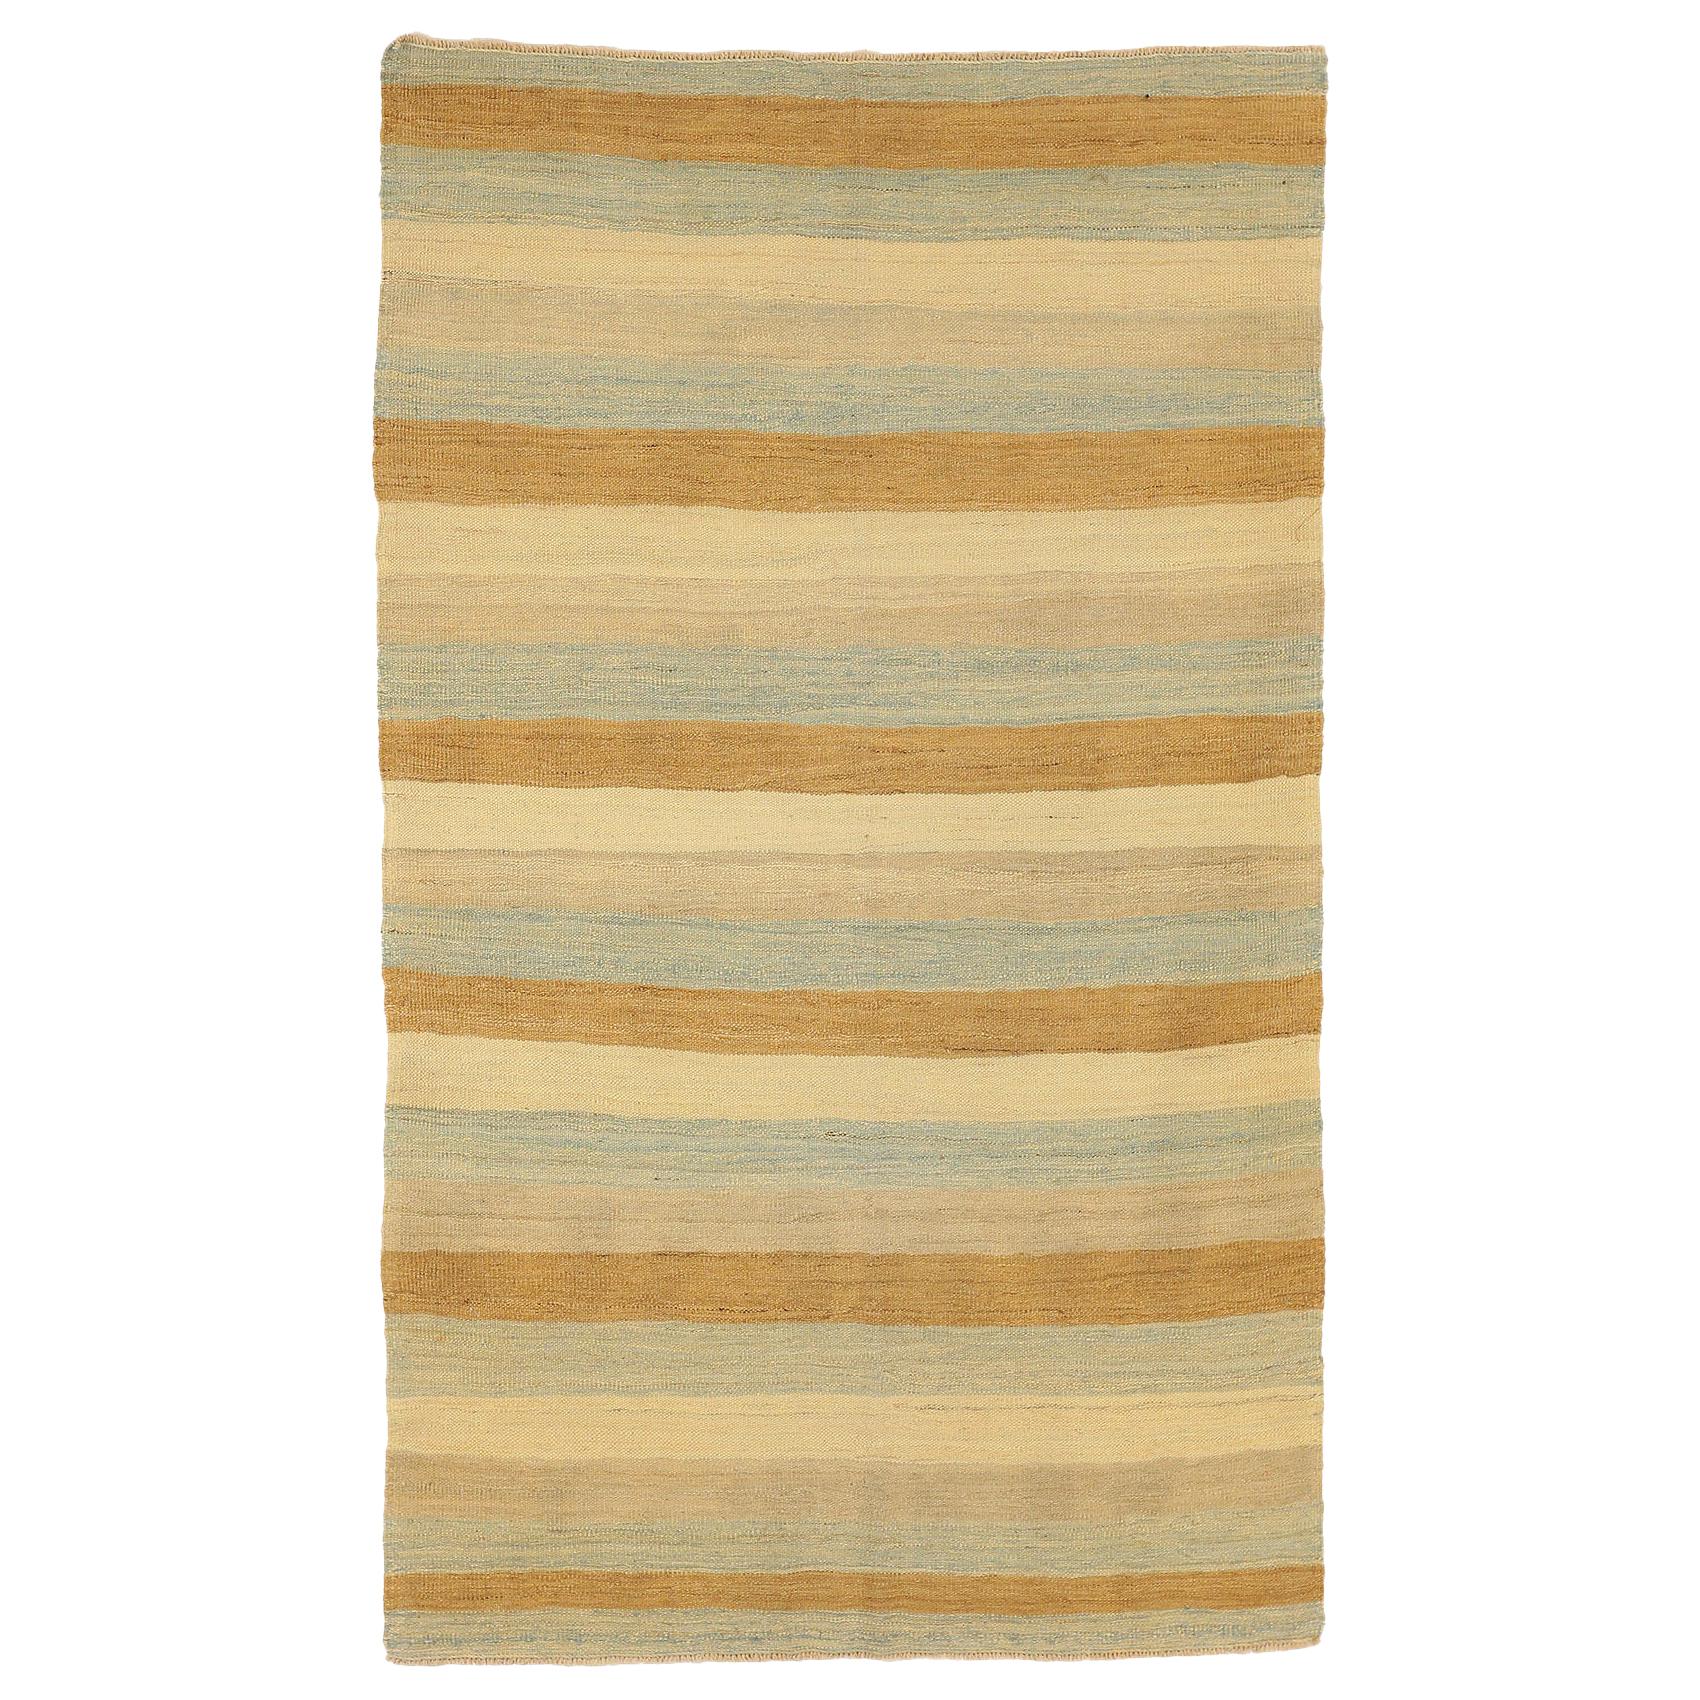 New Turkish Kilim Rug with an Ivory Field of Blue and Brown Stripes For Sale